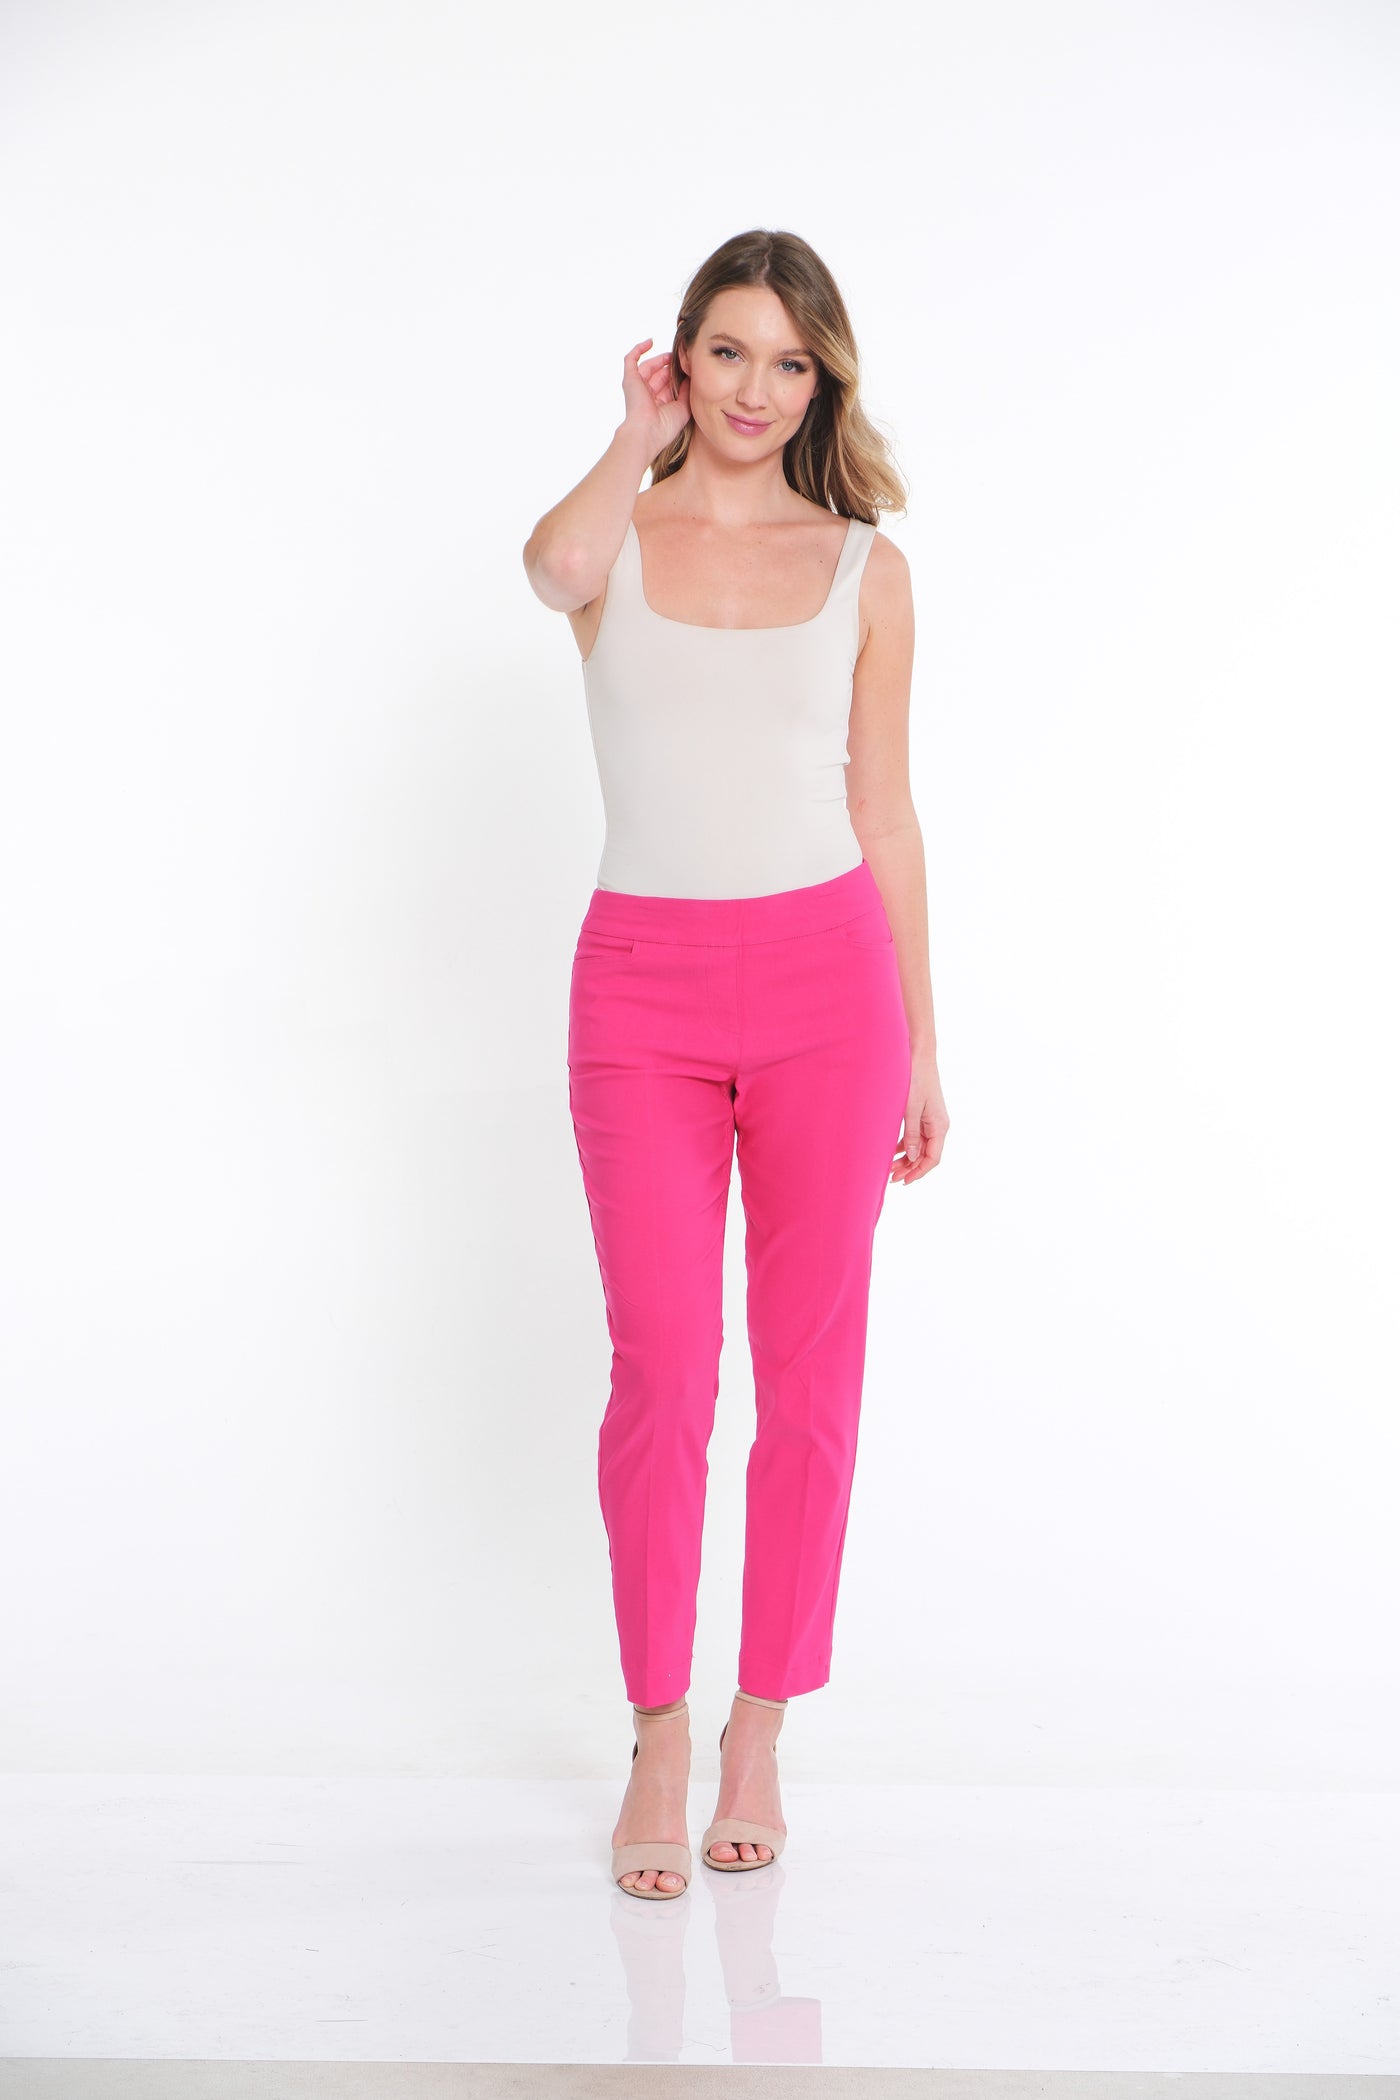 PULL-ON ANKLE PANT WITH REAL FRONT AND BACK POCKETS - Bright Fuchsia